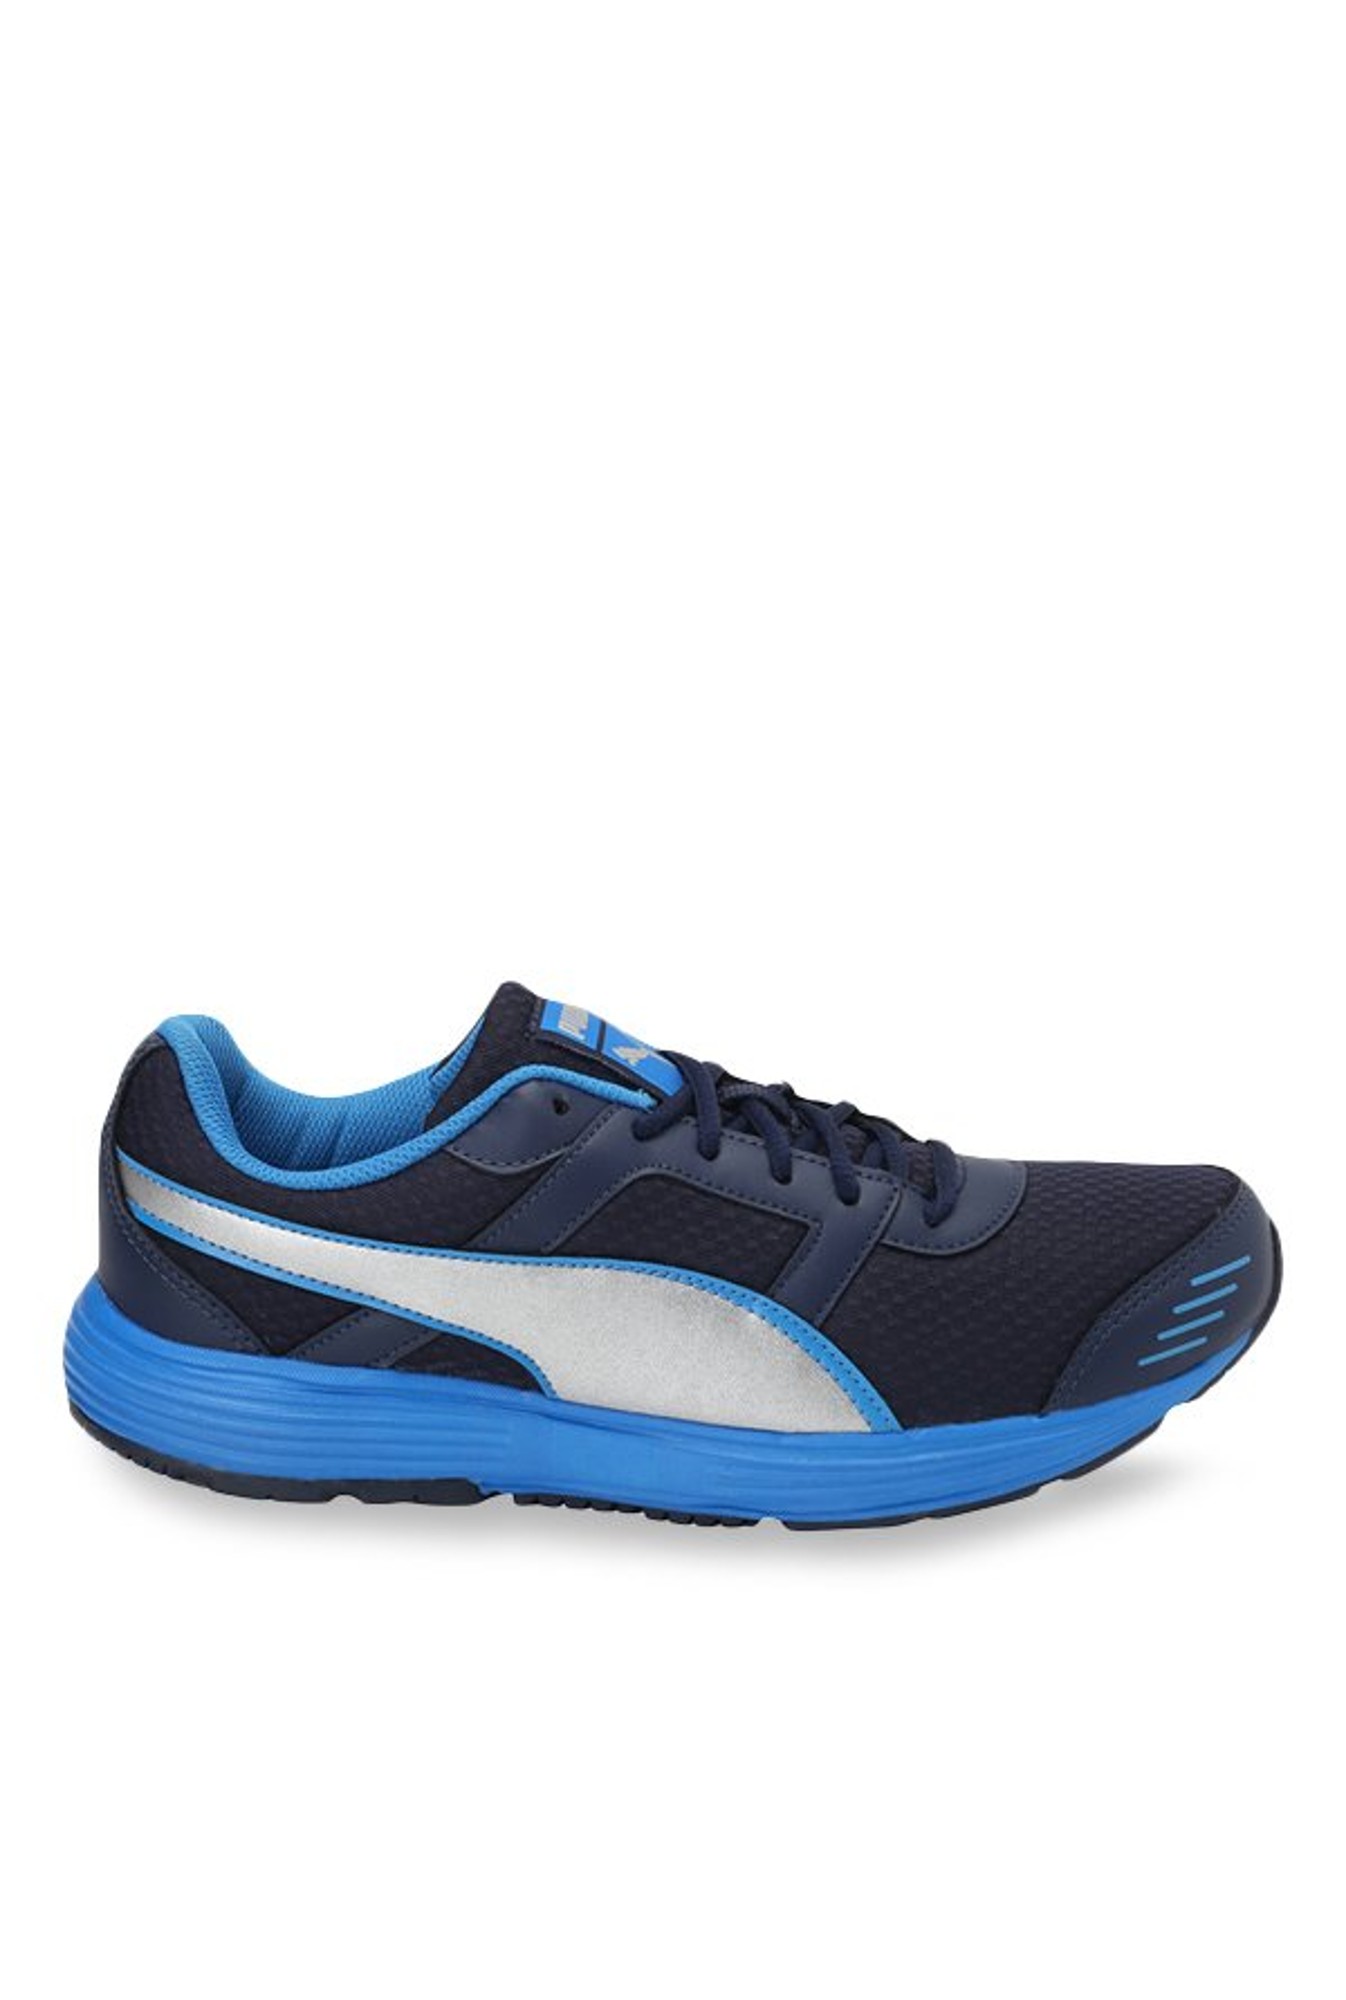 puma harbour dp running shoes